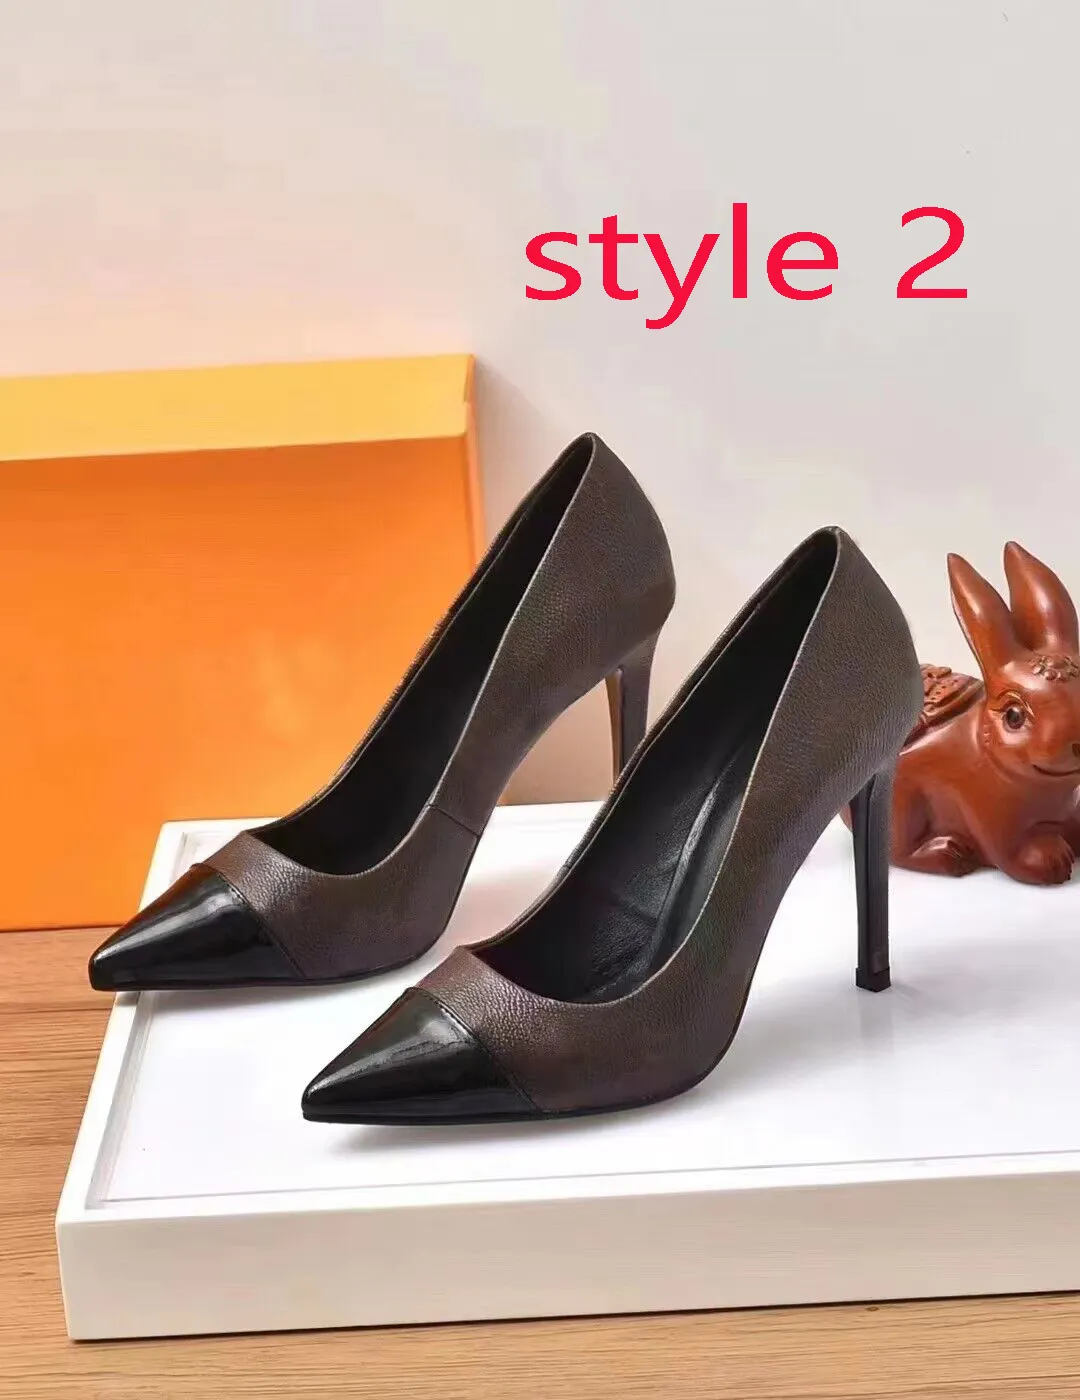 Dress shoes Classic high-heeled boat shoe Designer leather rivet Thick heel high heels 100% cowhide Metal Button women Pointed letter SHoes Large size 34-42 us4-us11